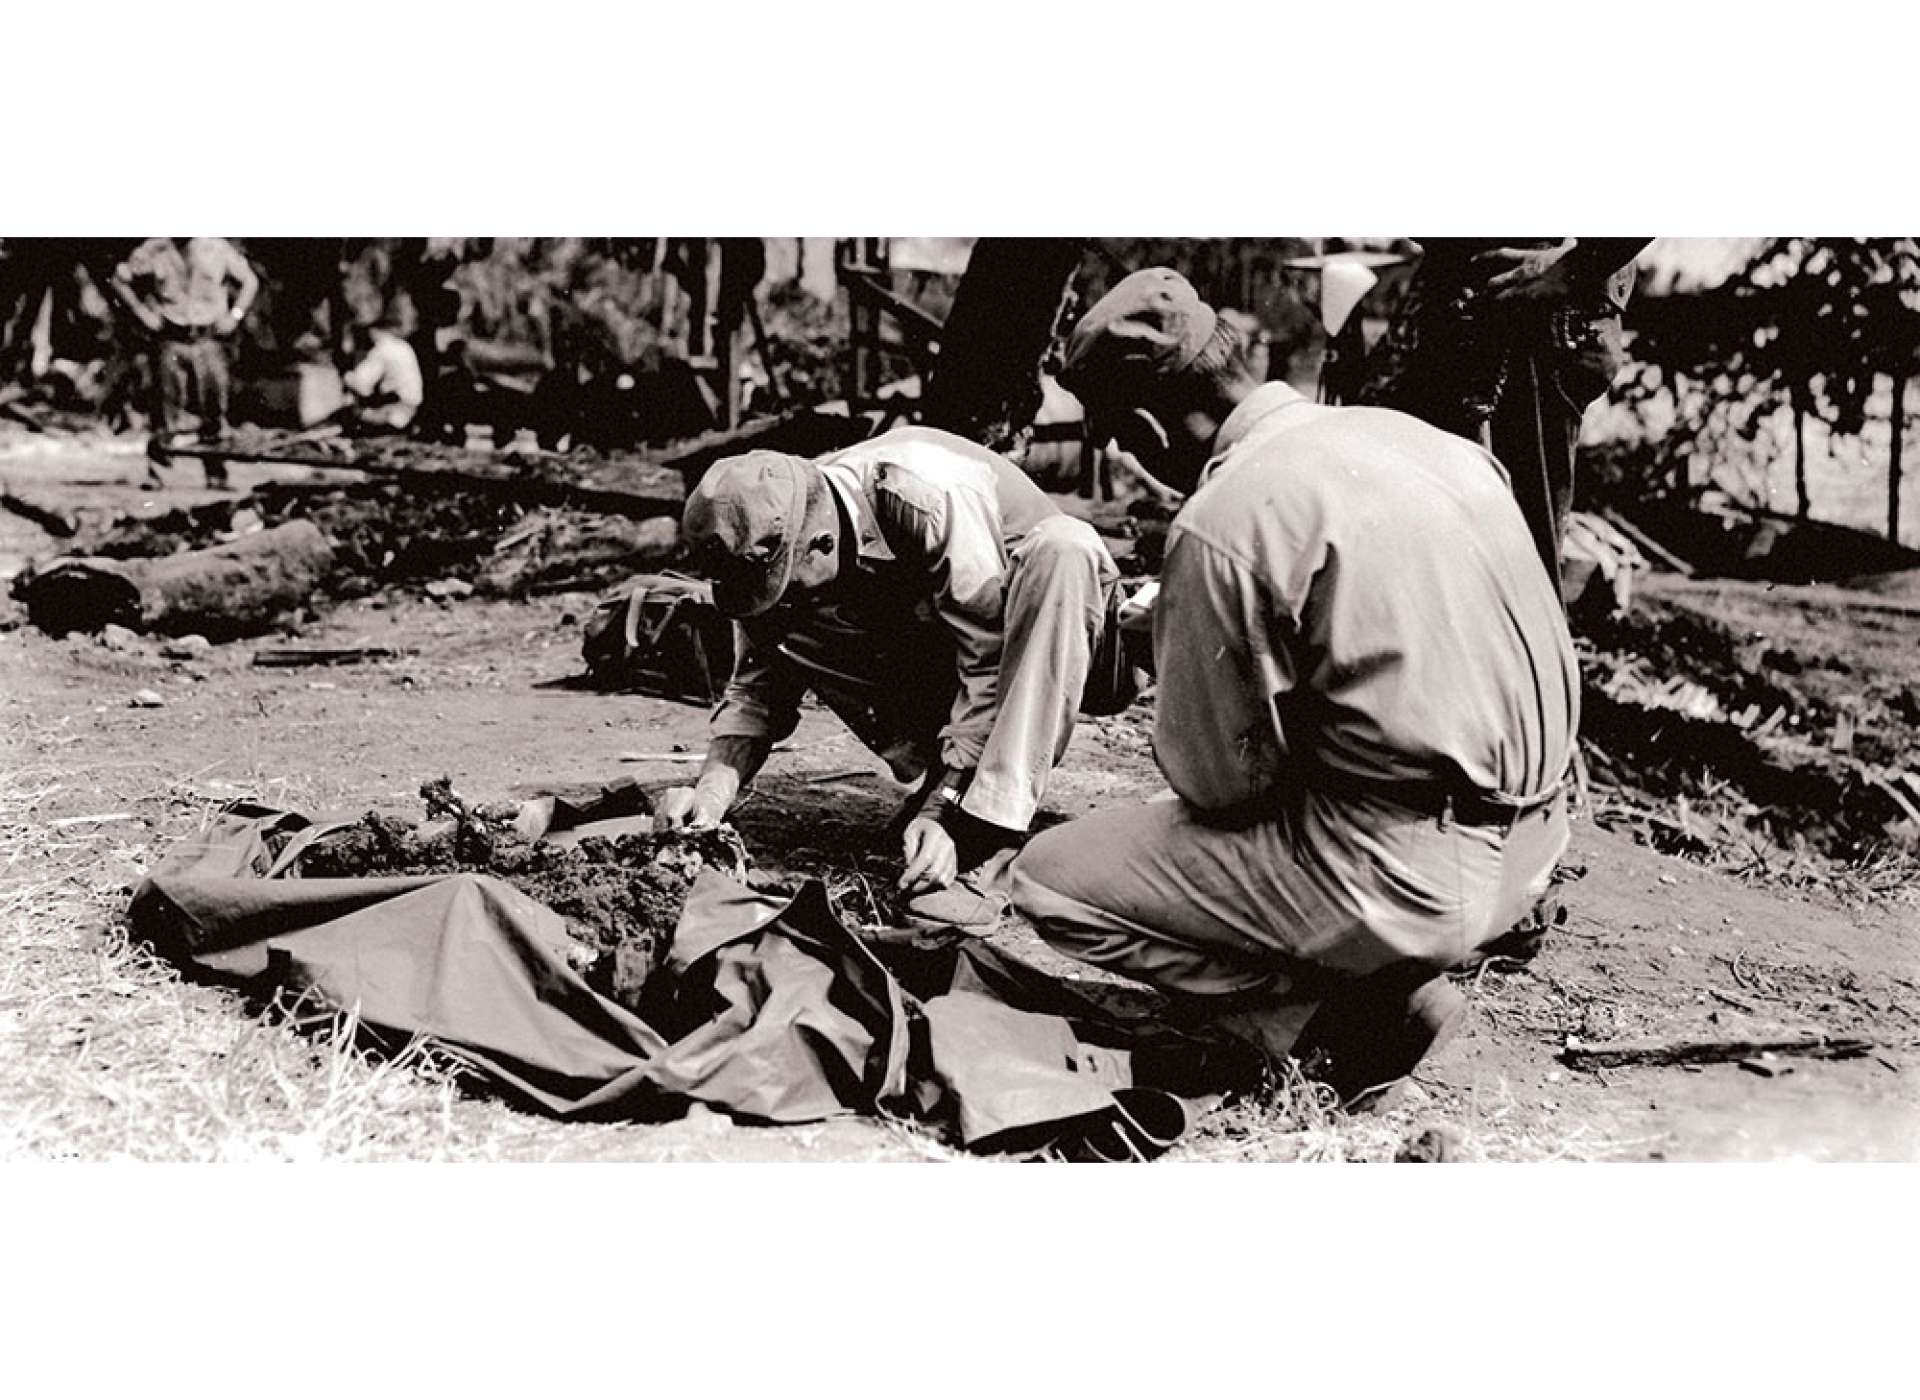 During recovery operations at Camp 10-A in March 1945, officers and medical personnel looked for anything to help them identify the victims of the Palawan massacre. In 1952, the remains of 123 of the victims were reinterred in a mass grave in the Jefferson Barracks National Cemetery near St. Louis. Photo courtesy of the US Army.